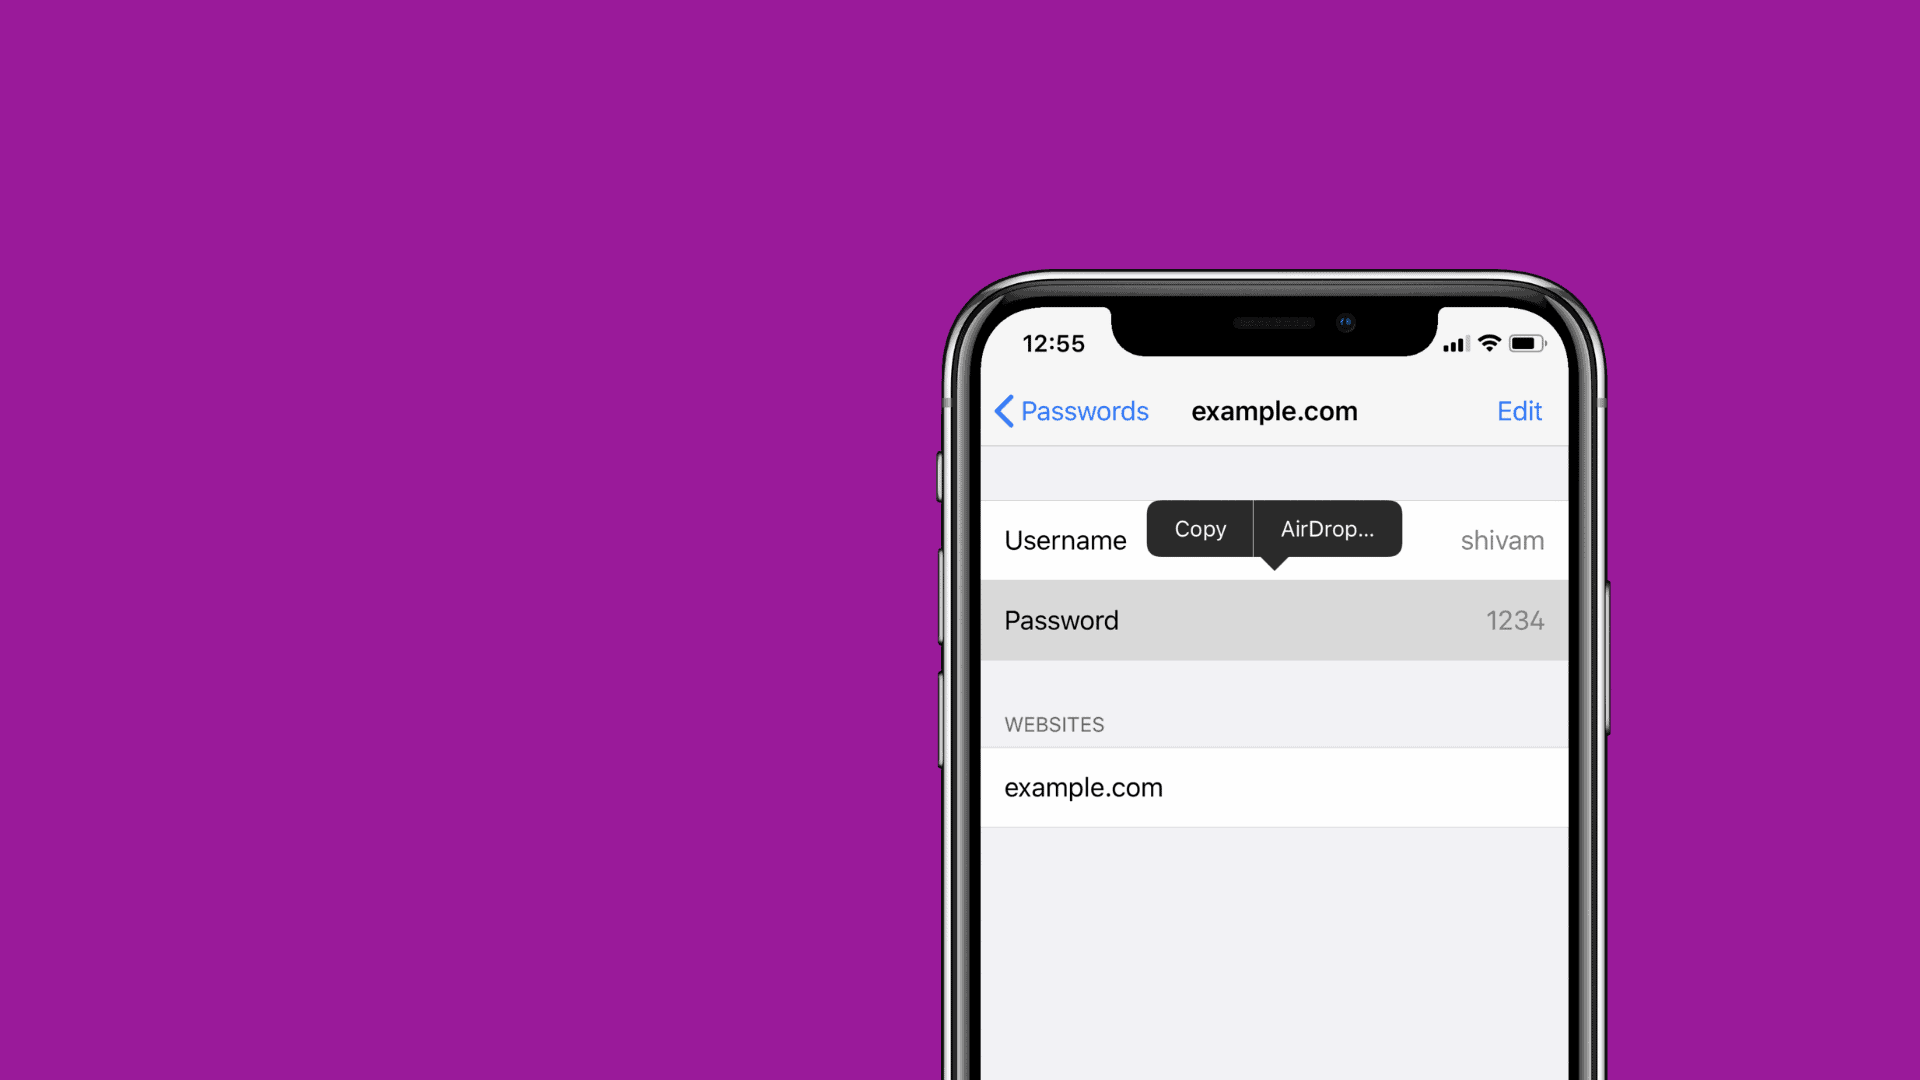 How to Share Passwords via AirDrop between iPhone, iPad and Mac [iOS 12]